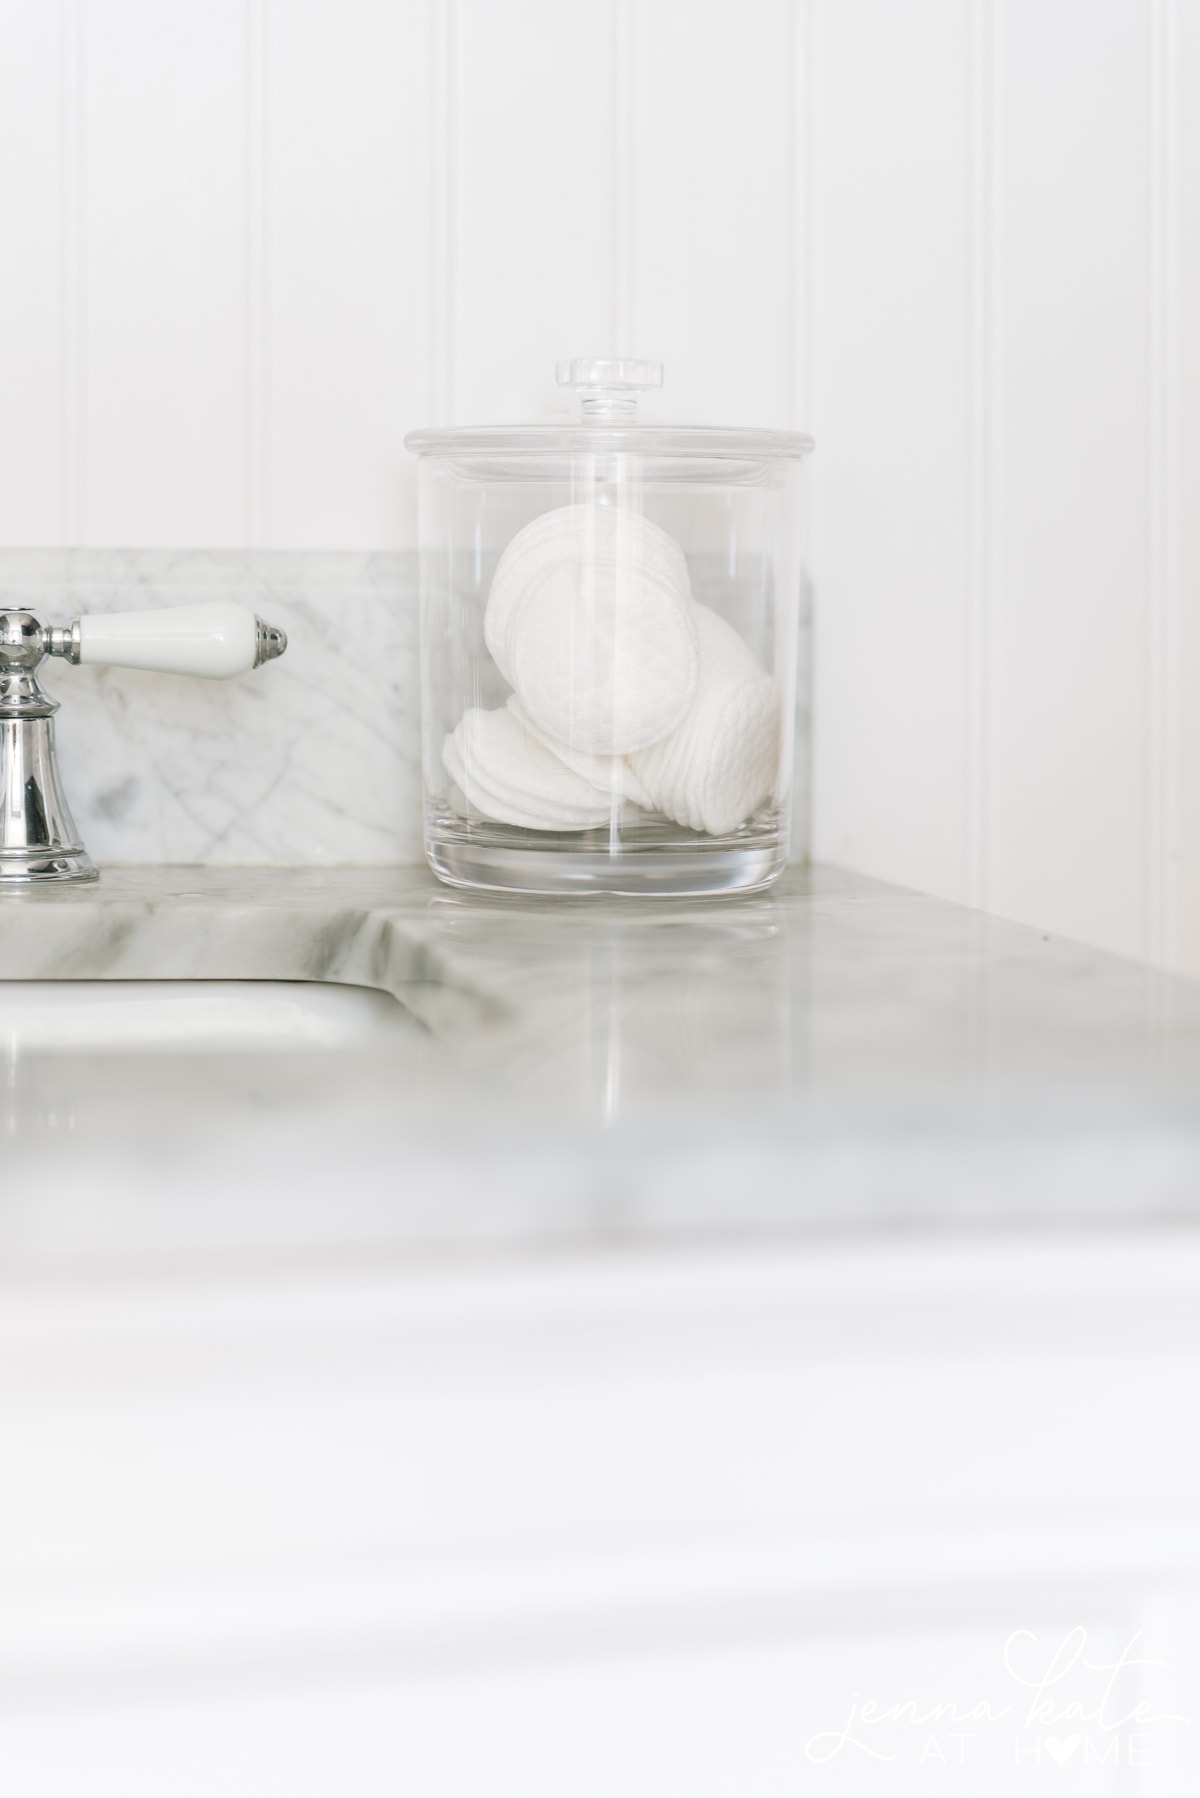 acrylic organizer filled with cotton rounds on top of bathroom counter